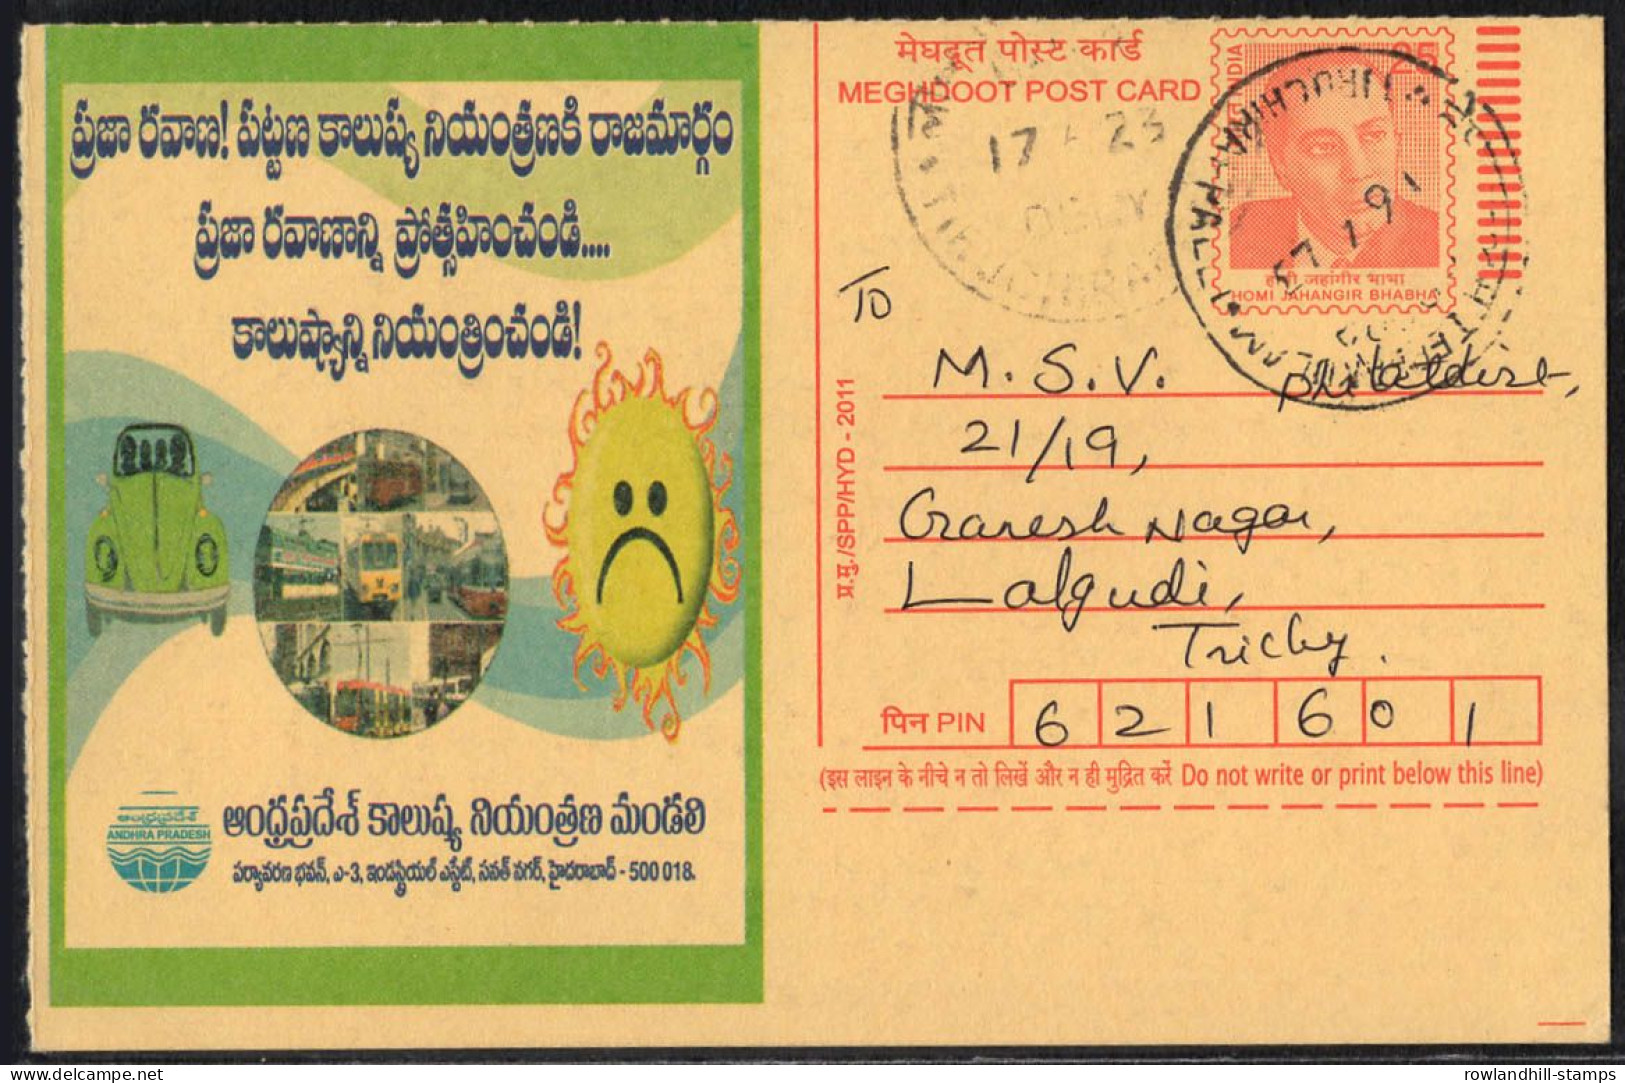 India, 2011, SAVE WATER, WATER CONSERVATION, Meghdoot Post Card, Used, Environment, Postcard, Energy, Sun, Andhra, B23 - Acqua